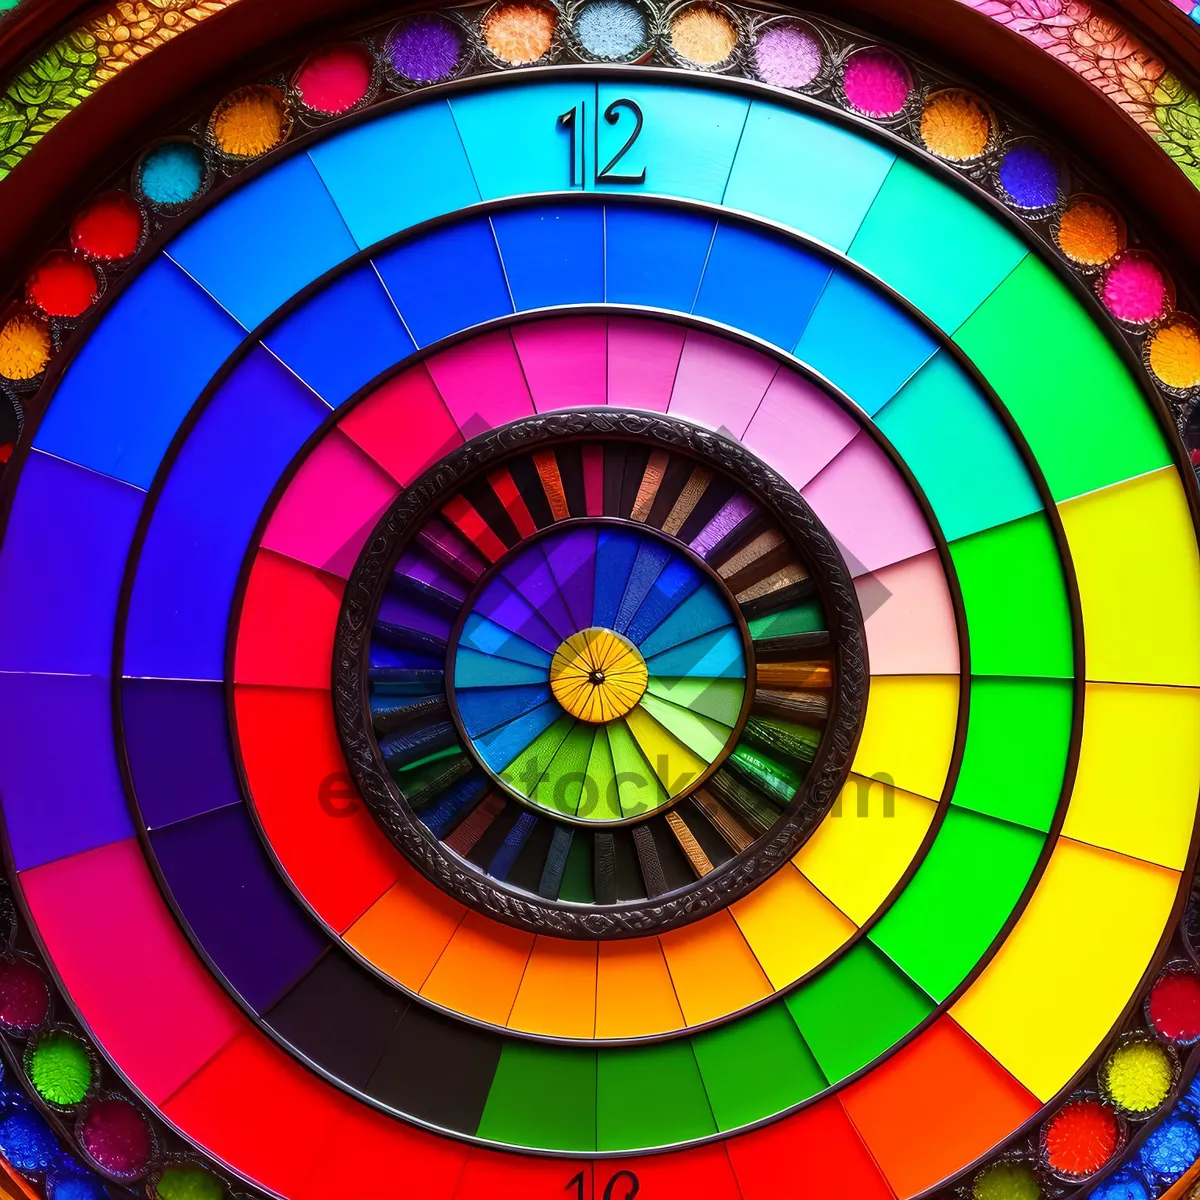 Picture of Colorful Light Mosaic Window Design: Artistic Roulette Wheel